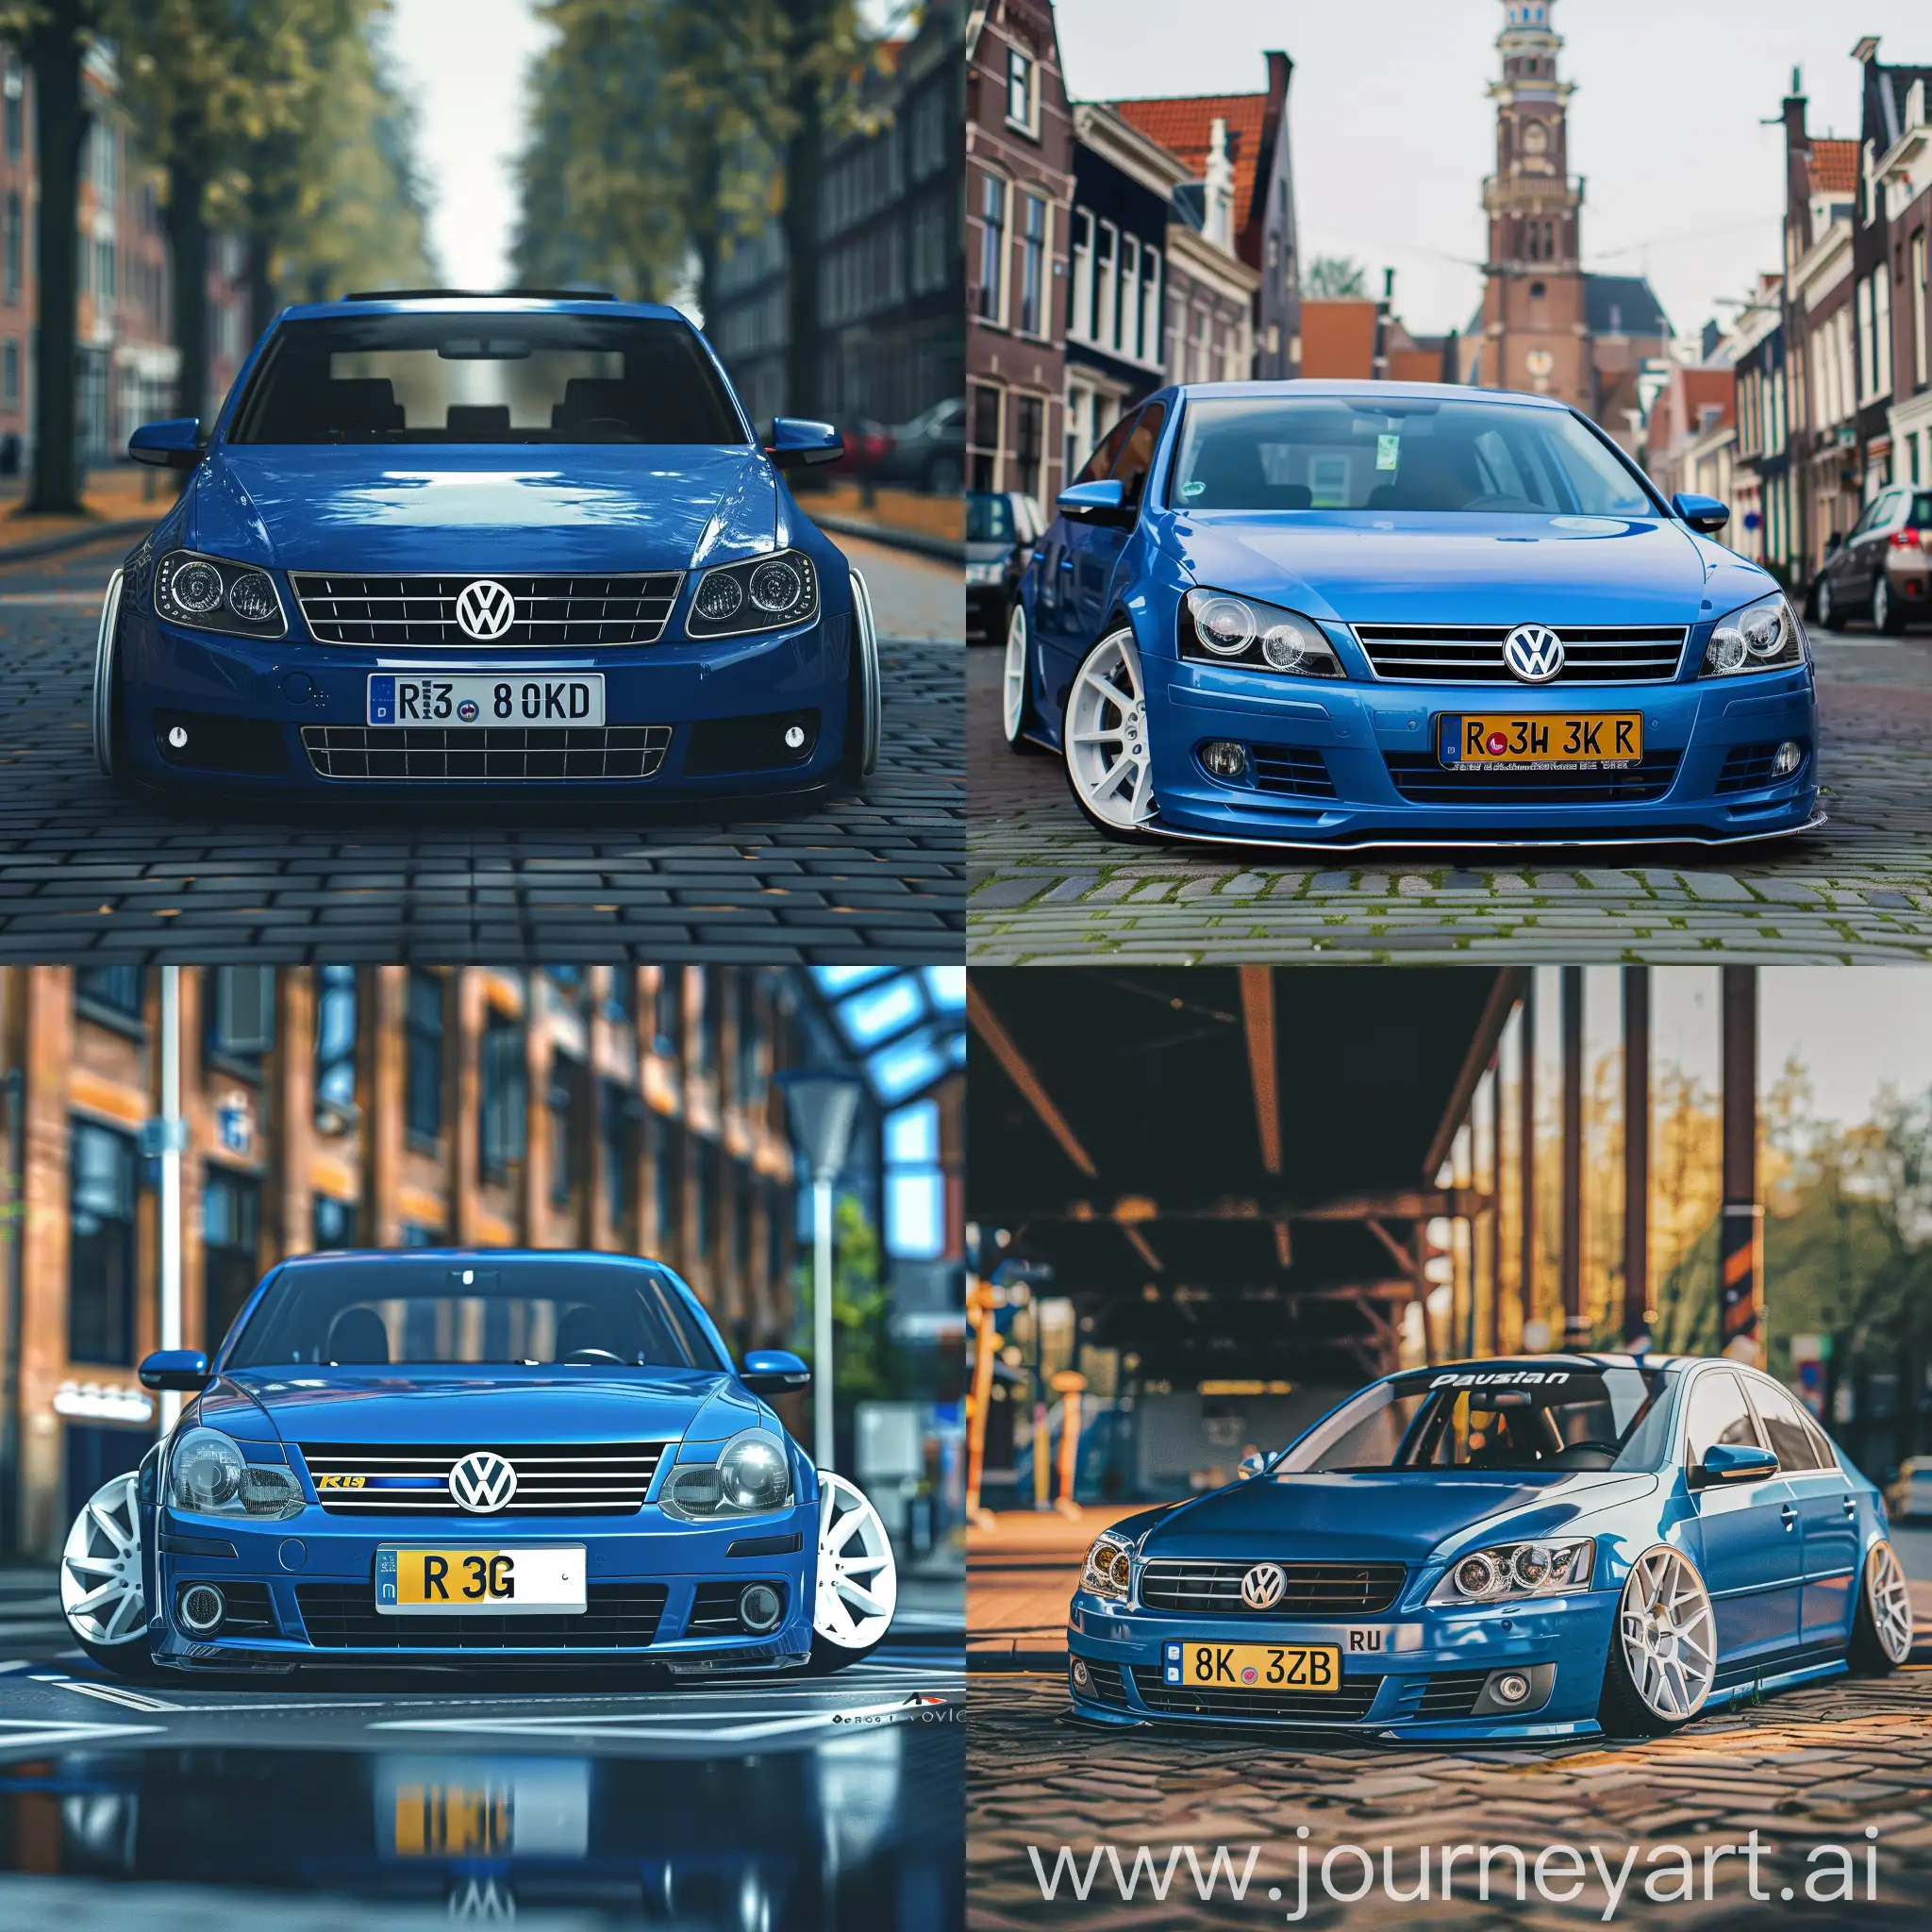 Realistic-Blue-Volkswagen-Passat-2011-R36-with-White-Rims-in-the-Netherlands